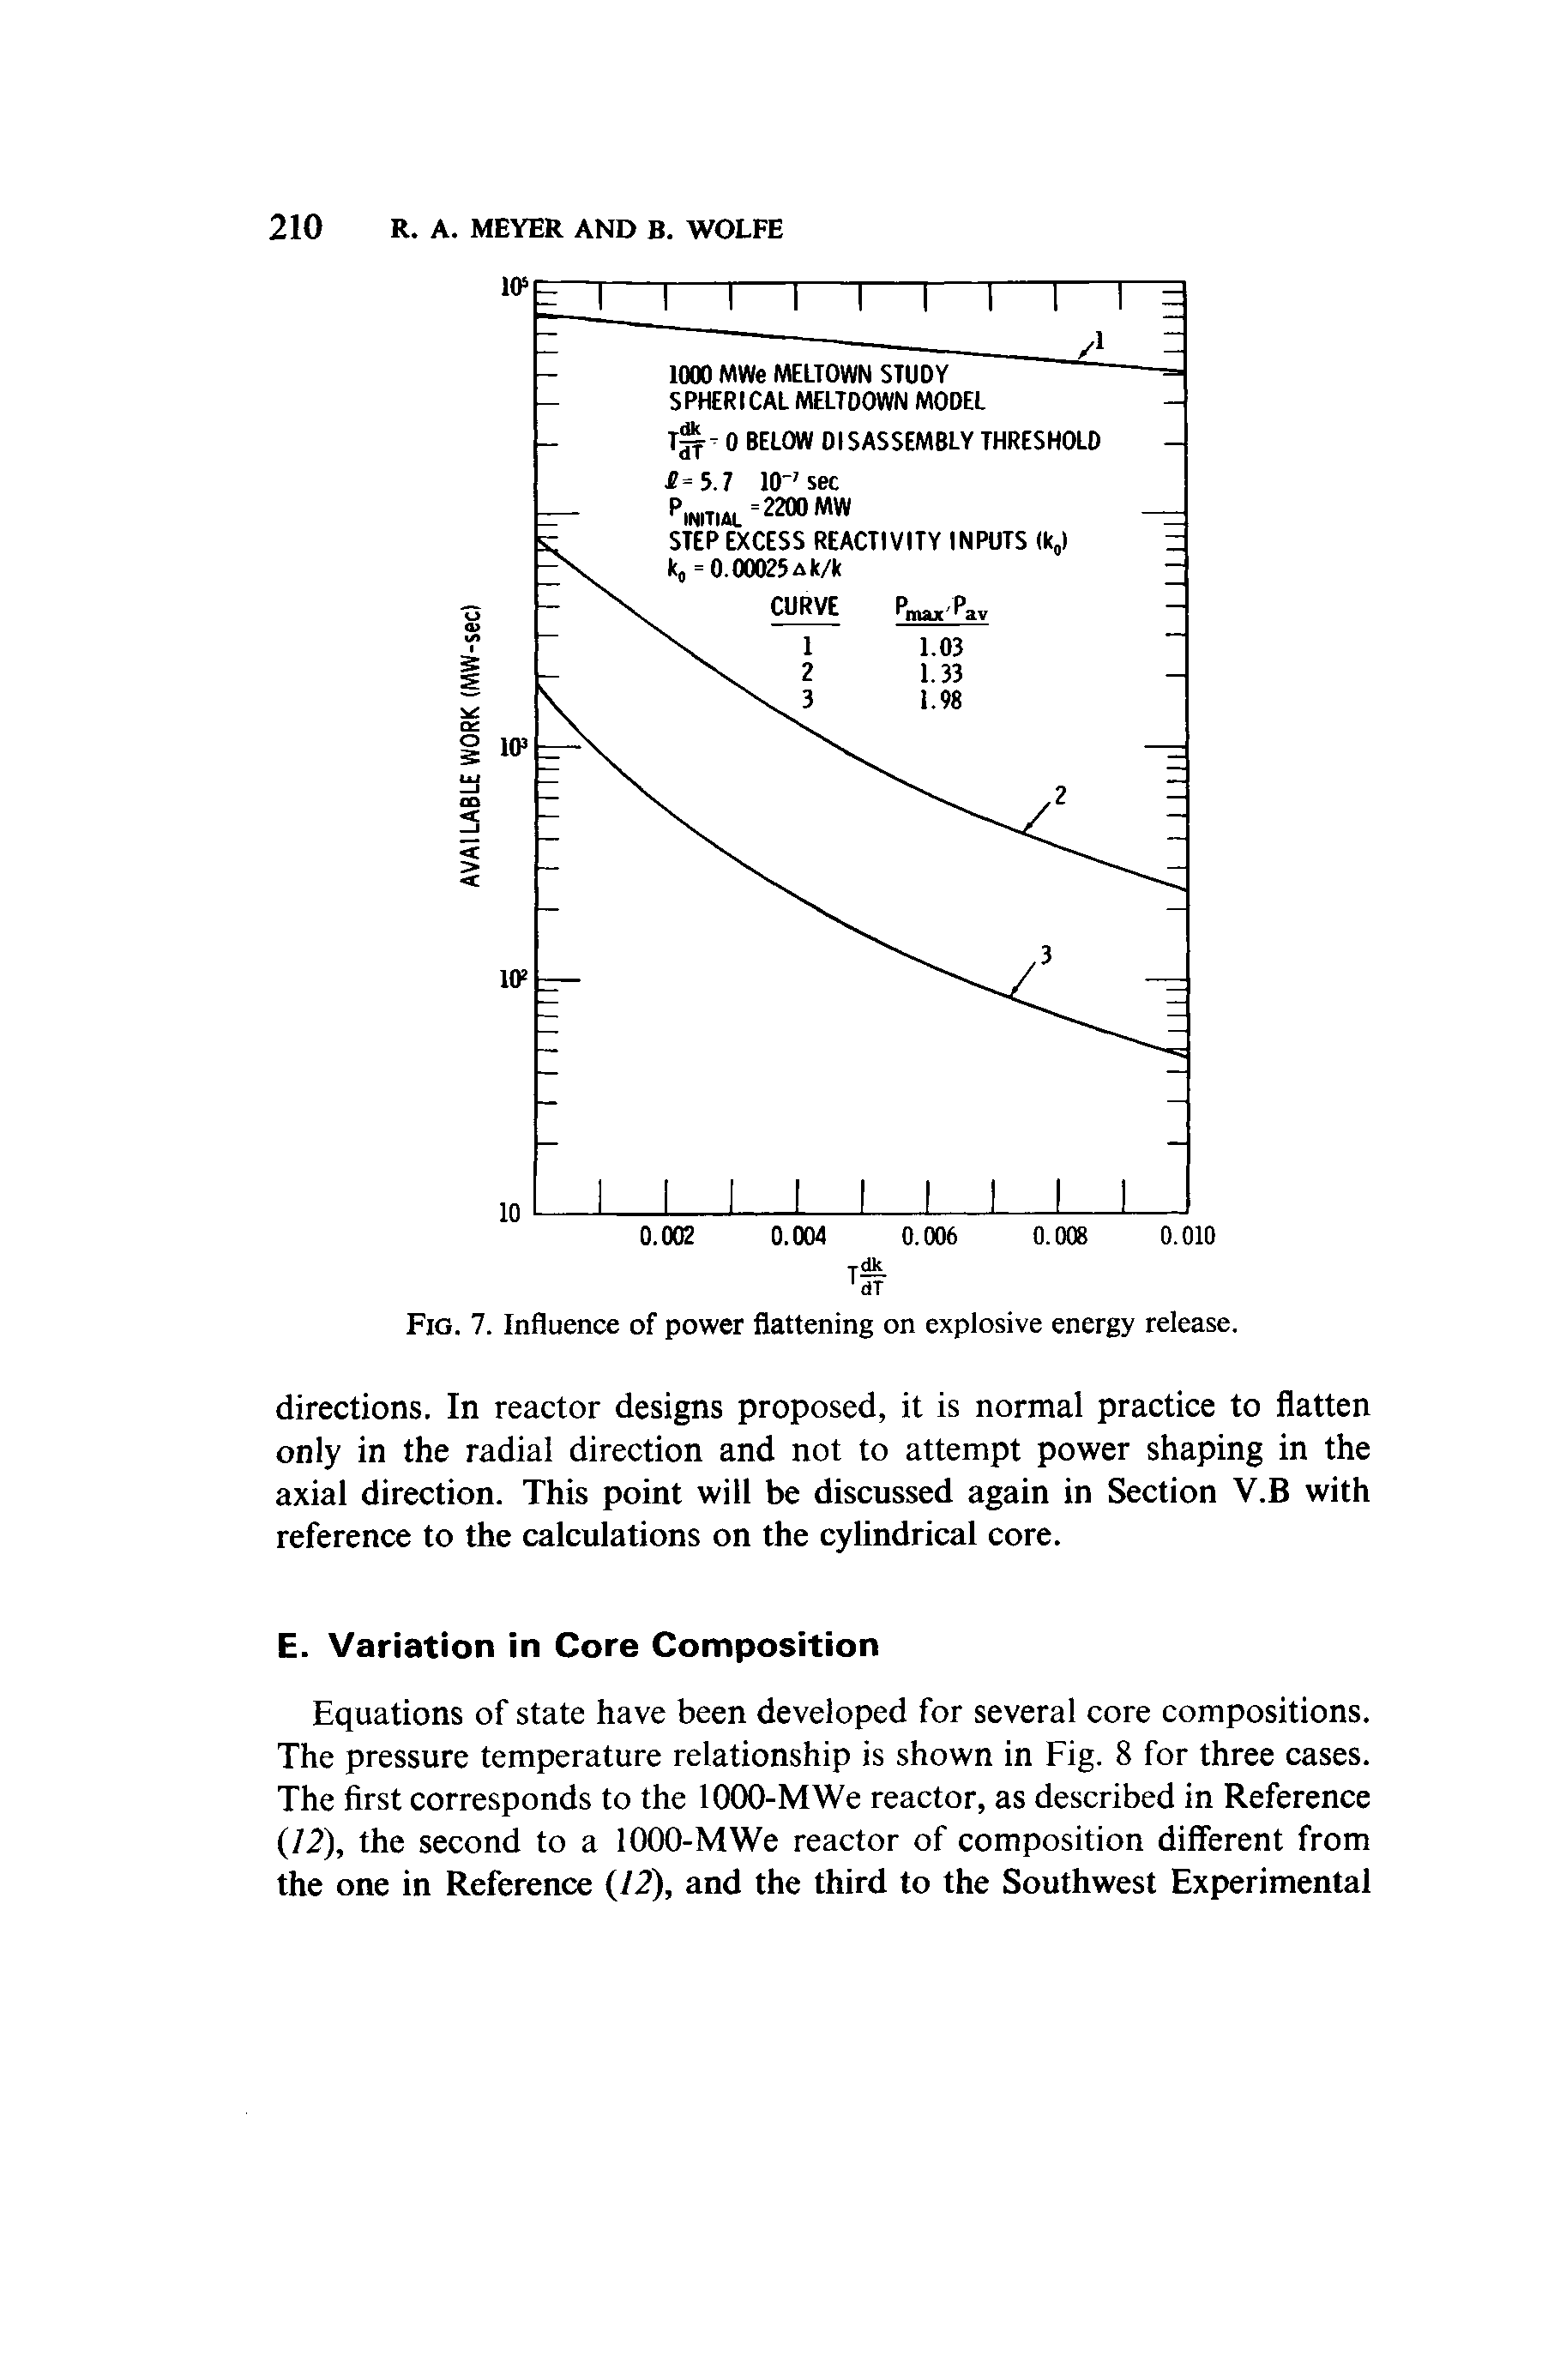 Fig. 7. Influence of power flattening on explosive energy release.